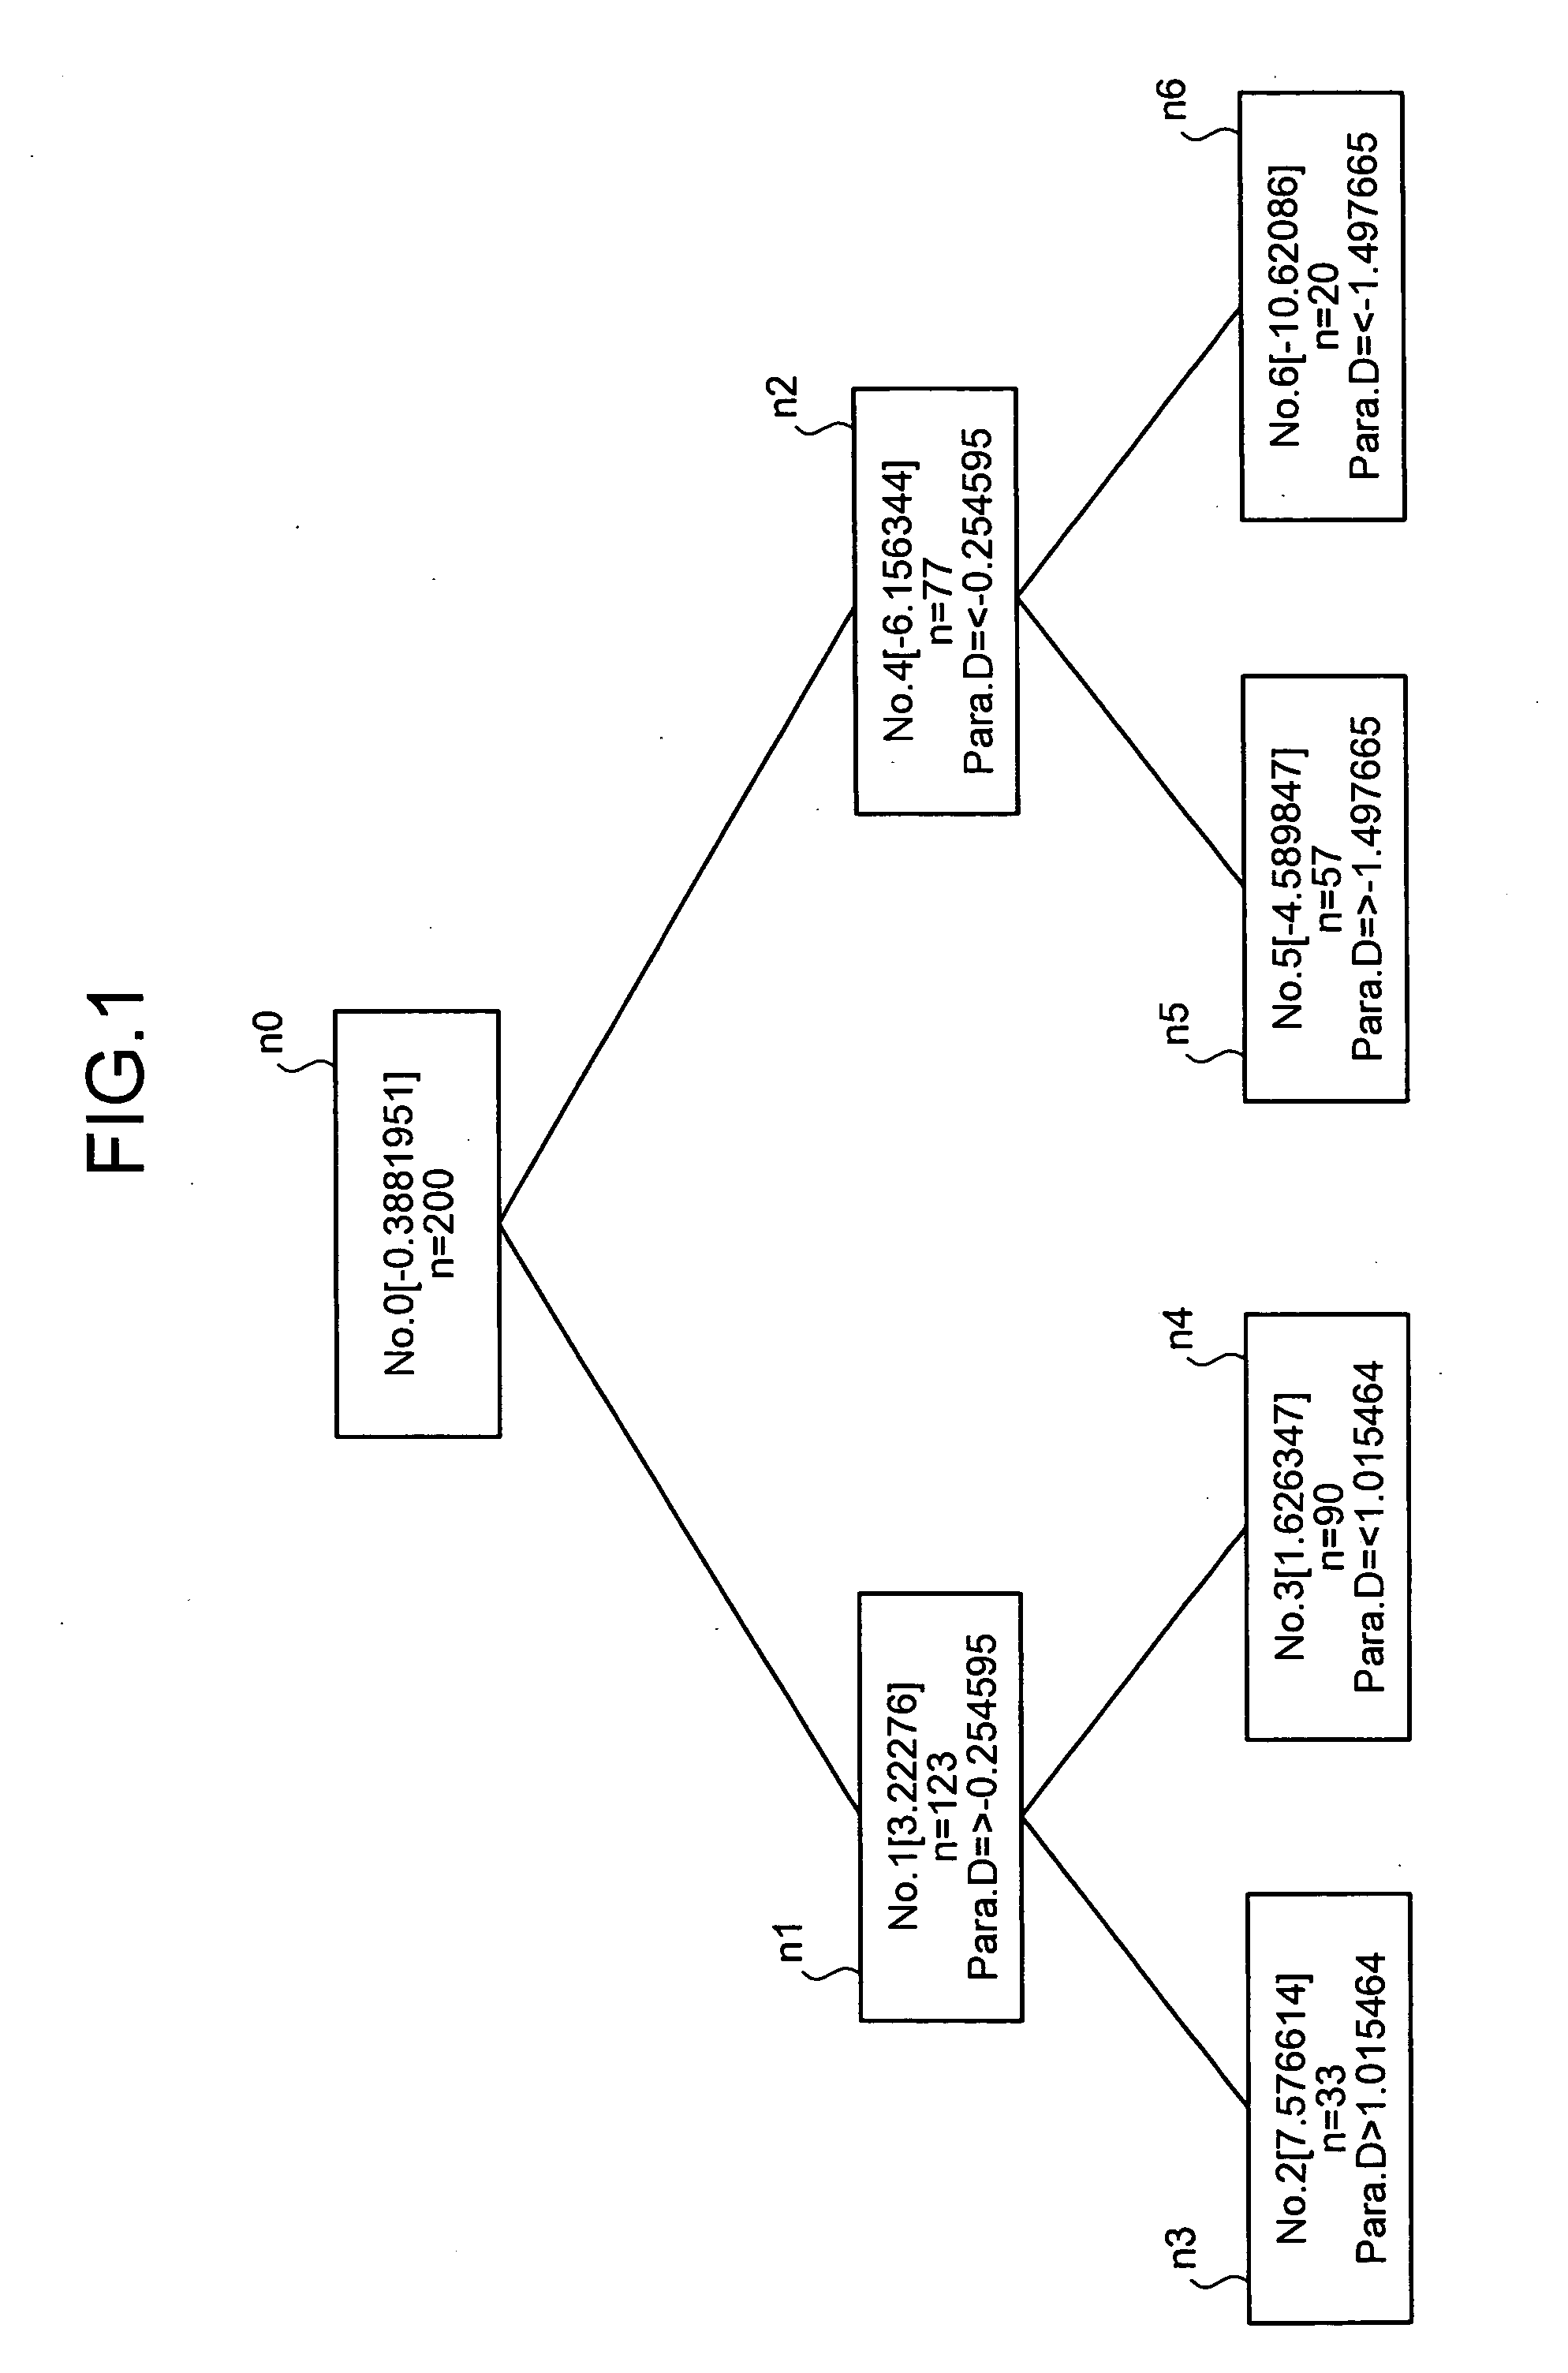 Method and apparatus for processing data, and computer product